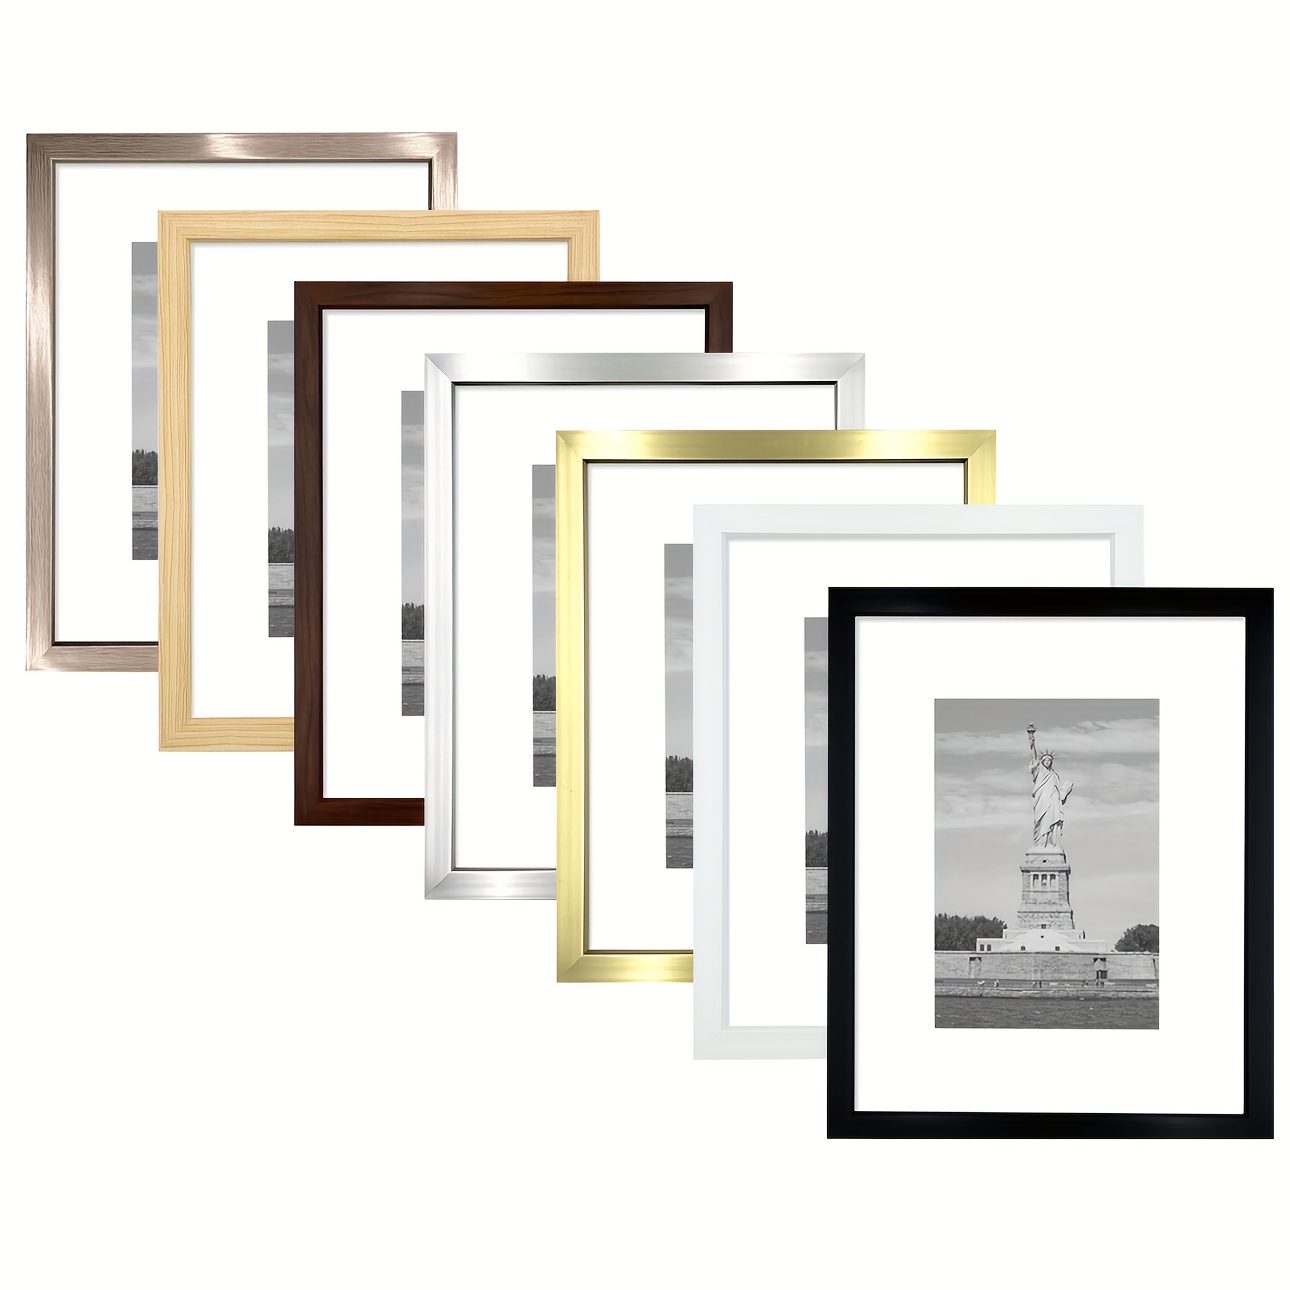 Americanflat 5x7 Thin Picture Frame in Black - Displays 4x6 with Mat and 5x7 Without Mat - Horizontal and Vertical Formats for Wall and Tabletop